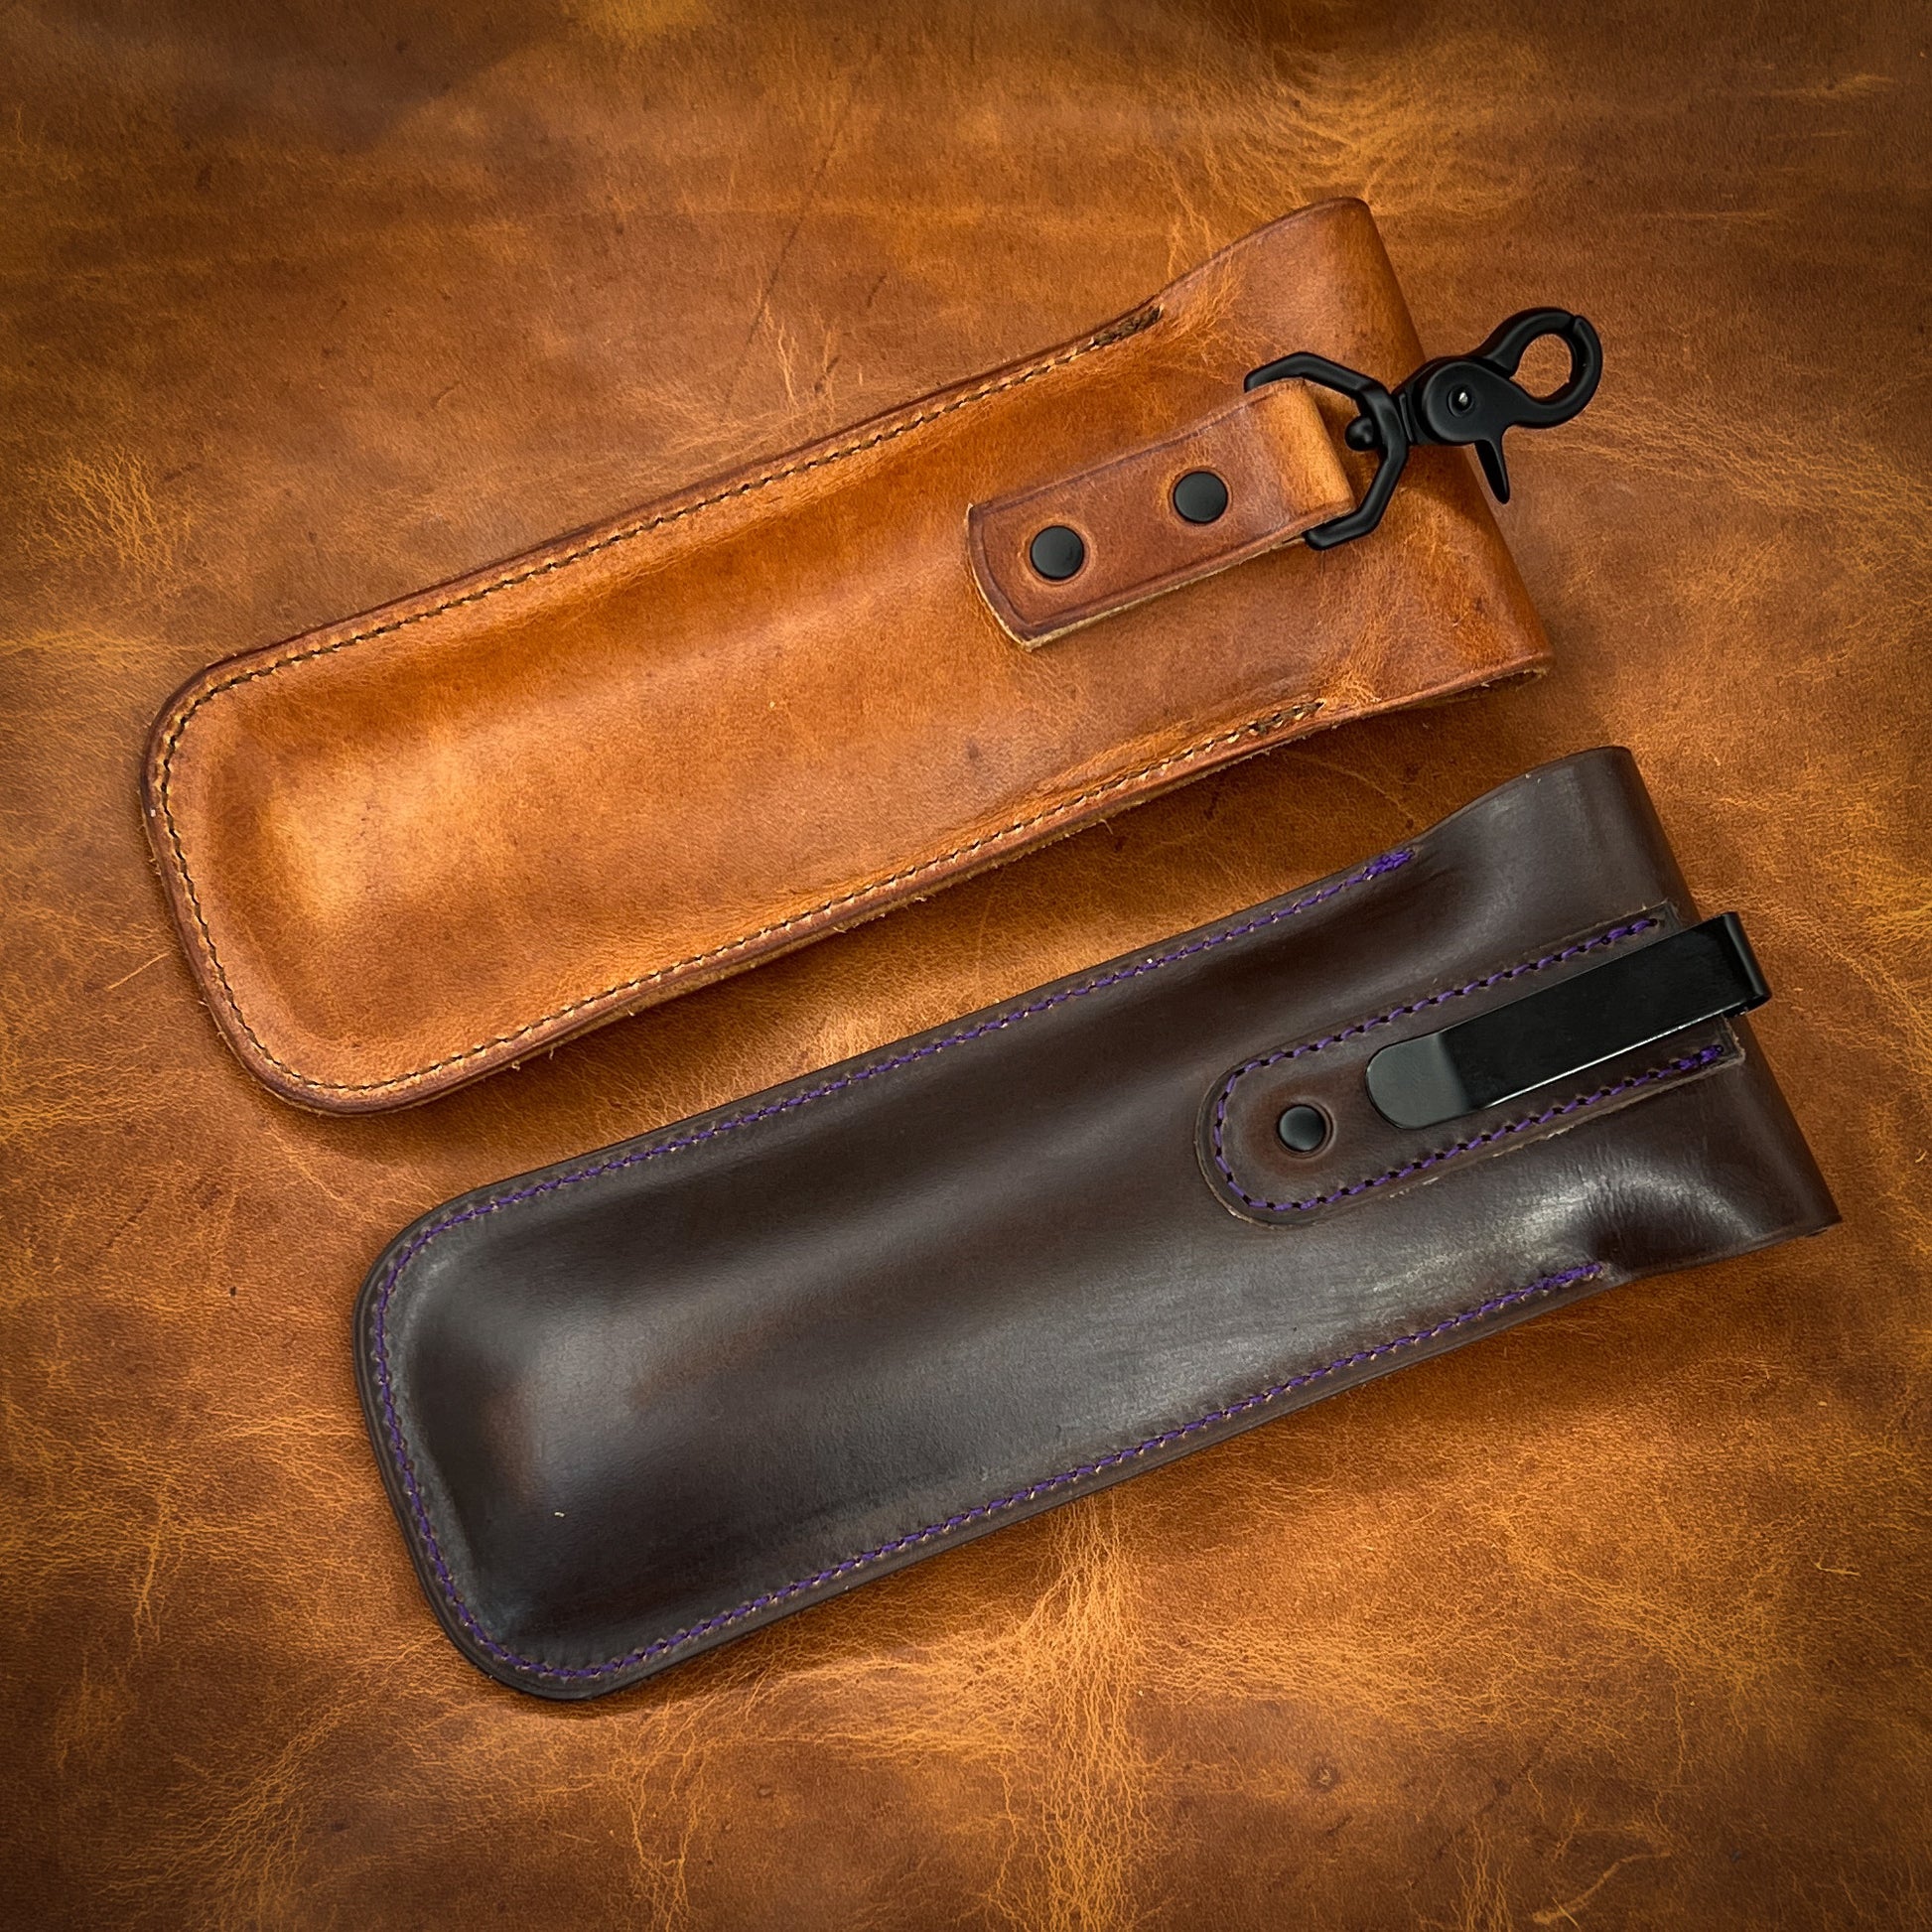 Belt Clip and Swivel Clip EpiPen Carrying Cases in Horween Leather | Handmade in Houston, TX by Custom Leather and Pen